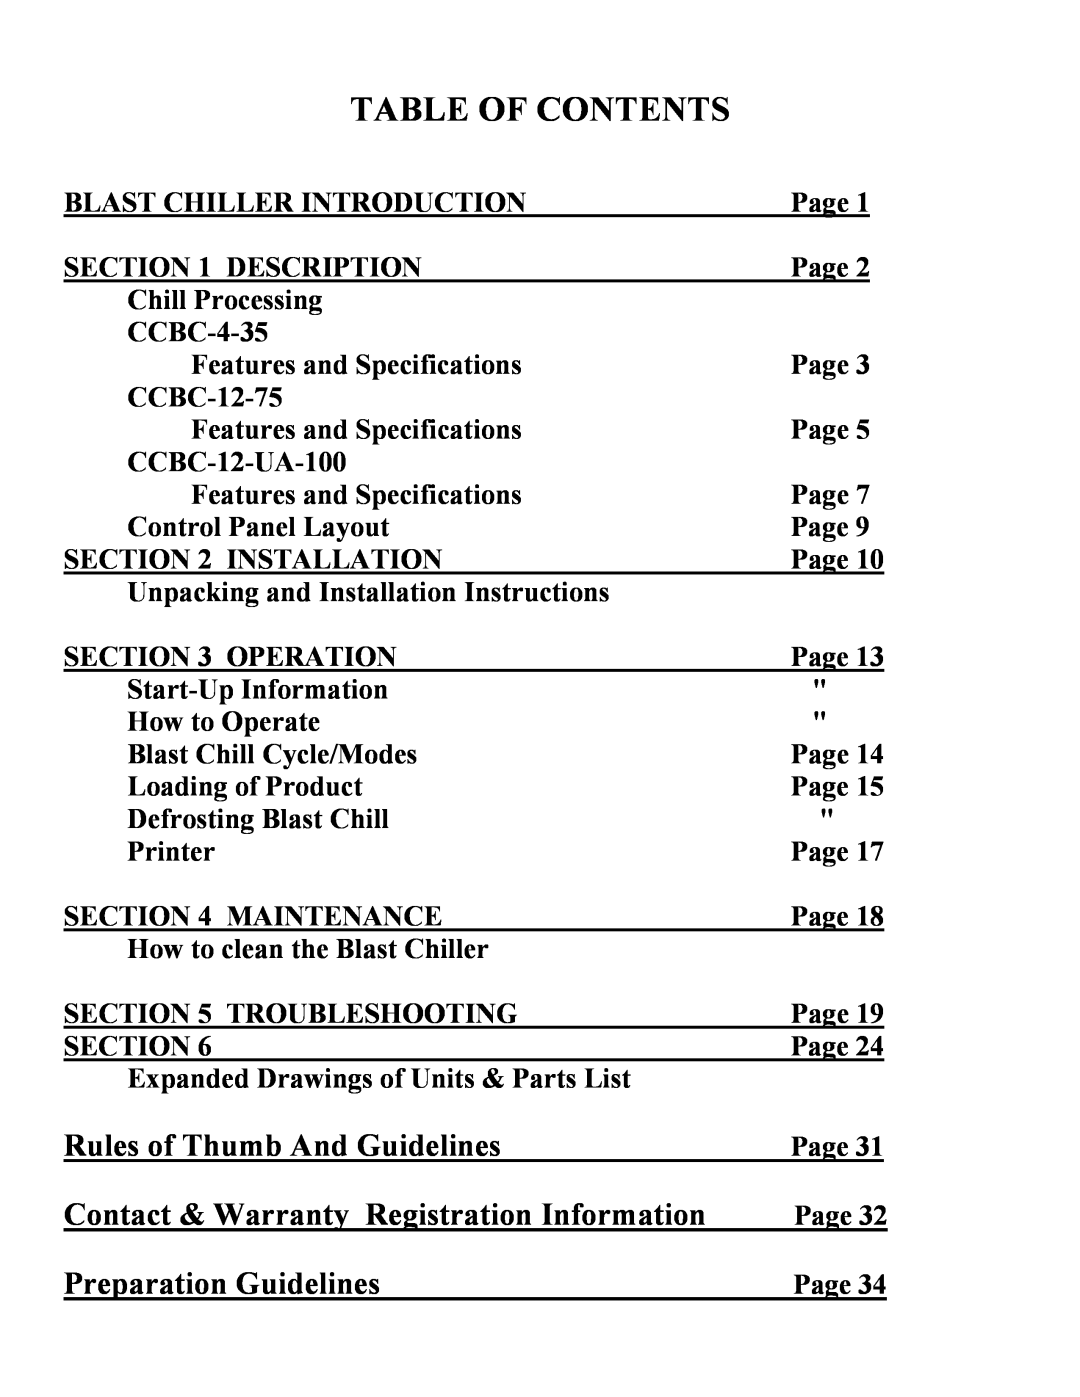 Cres Cor CCBC12-UA-100 Table Of Contents, Rules of Thumb And Guidelines, Contact & Warranty Registration Information 